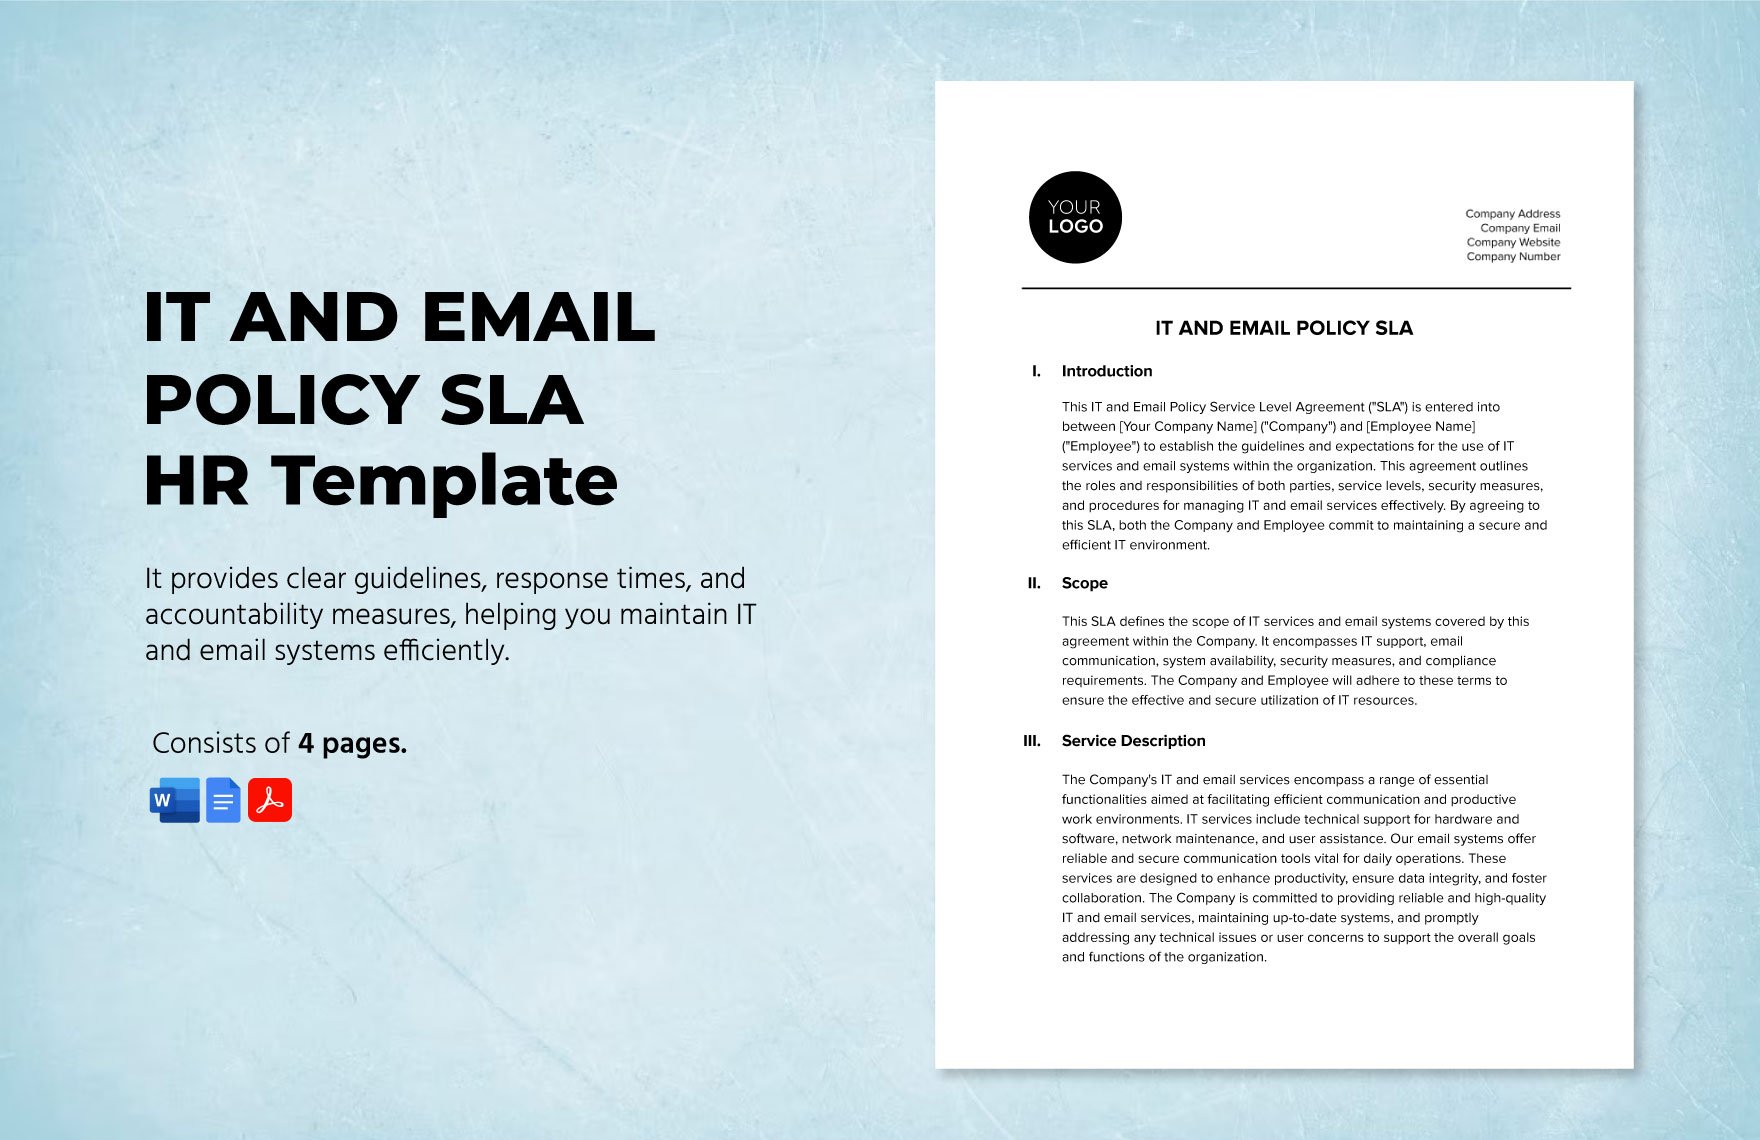 IT and Email Policy SLA HR Template